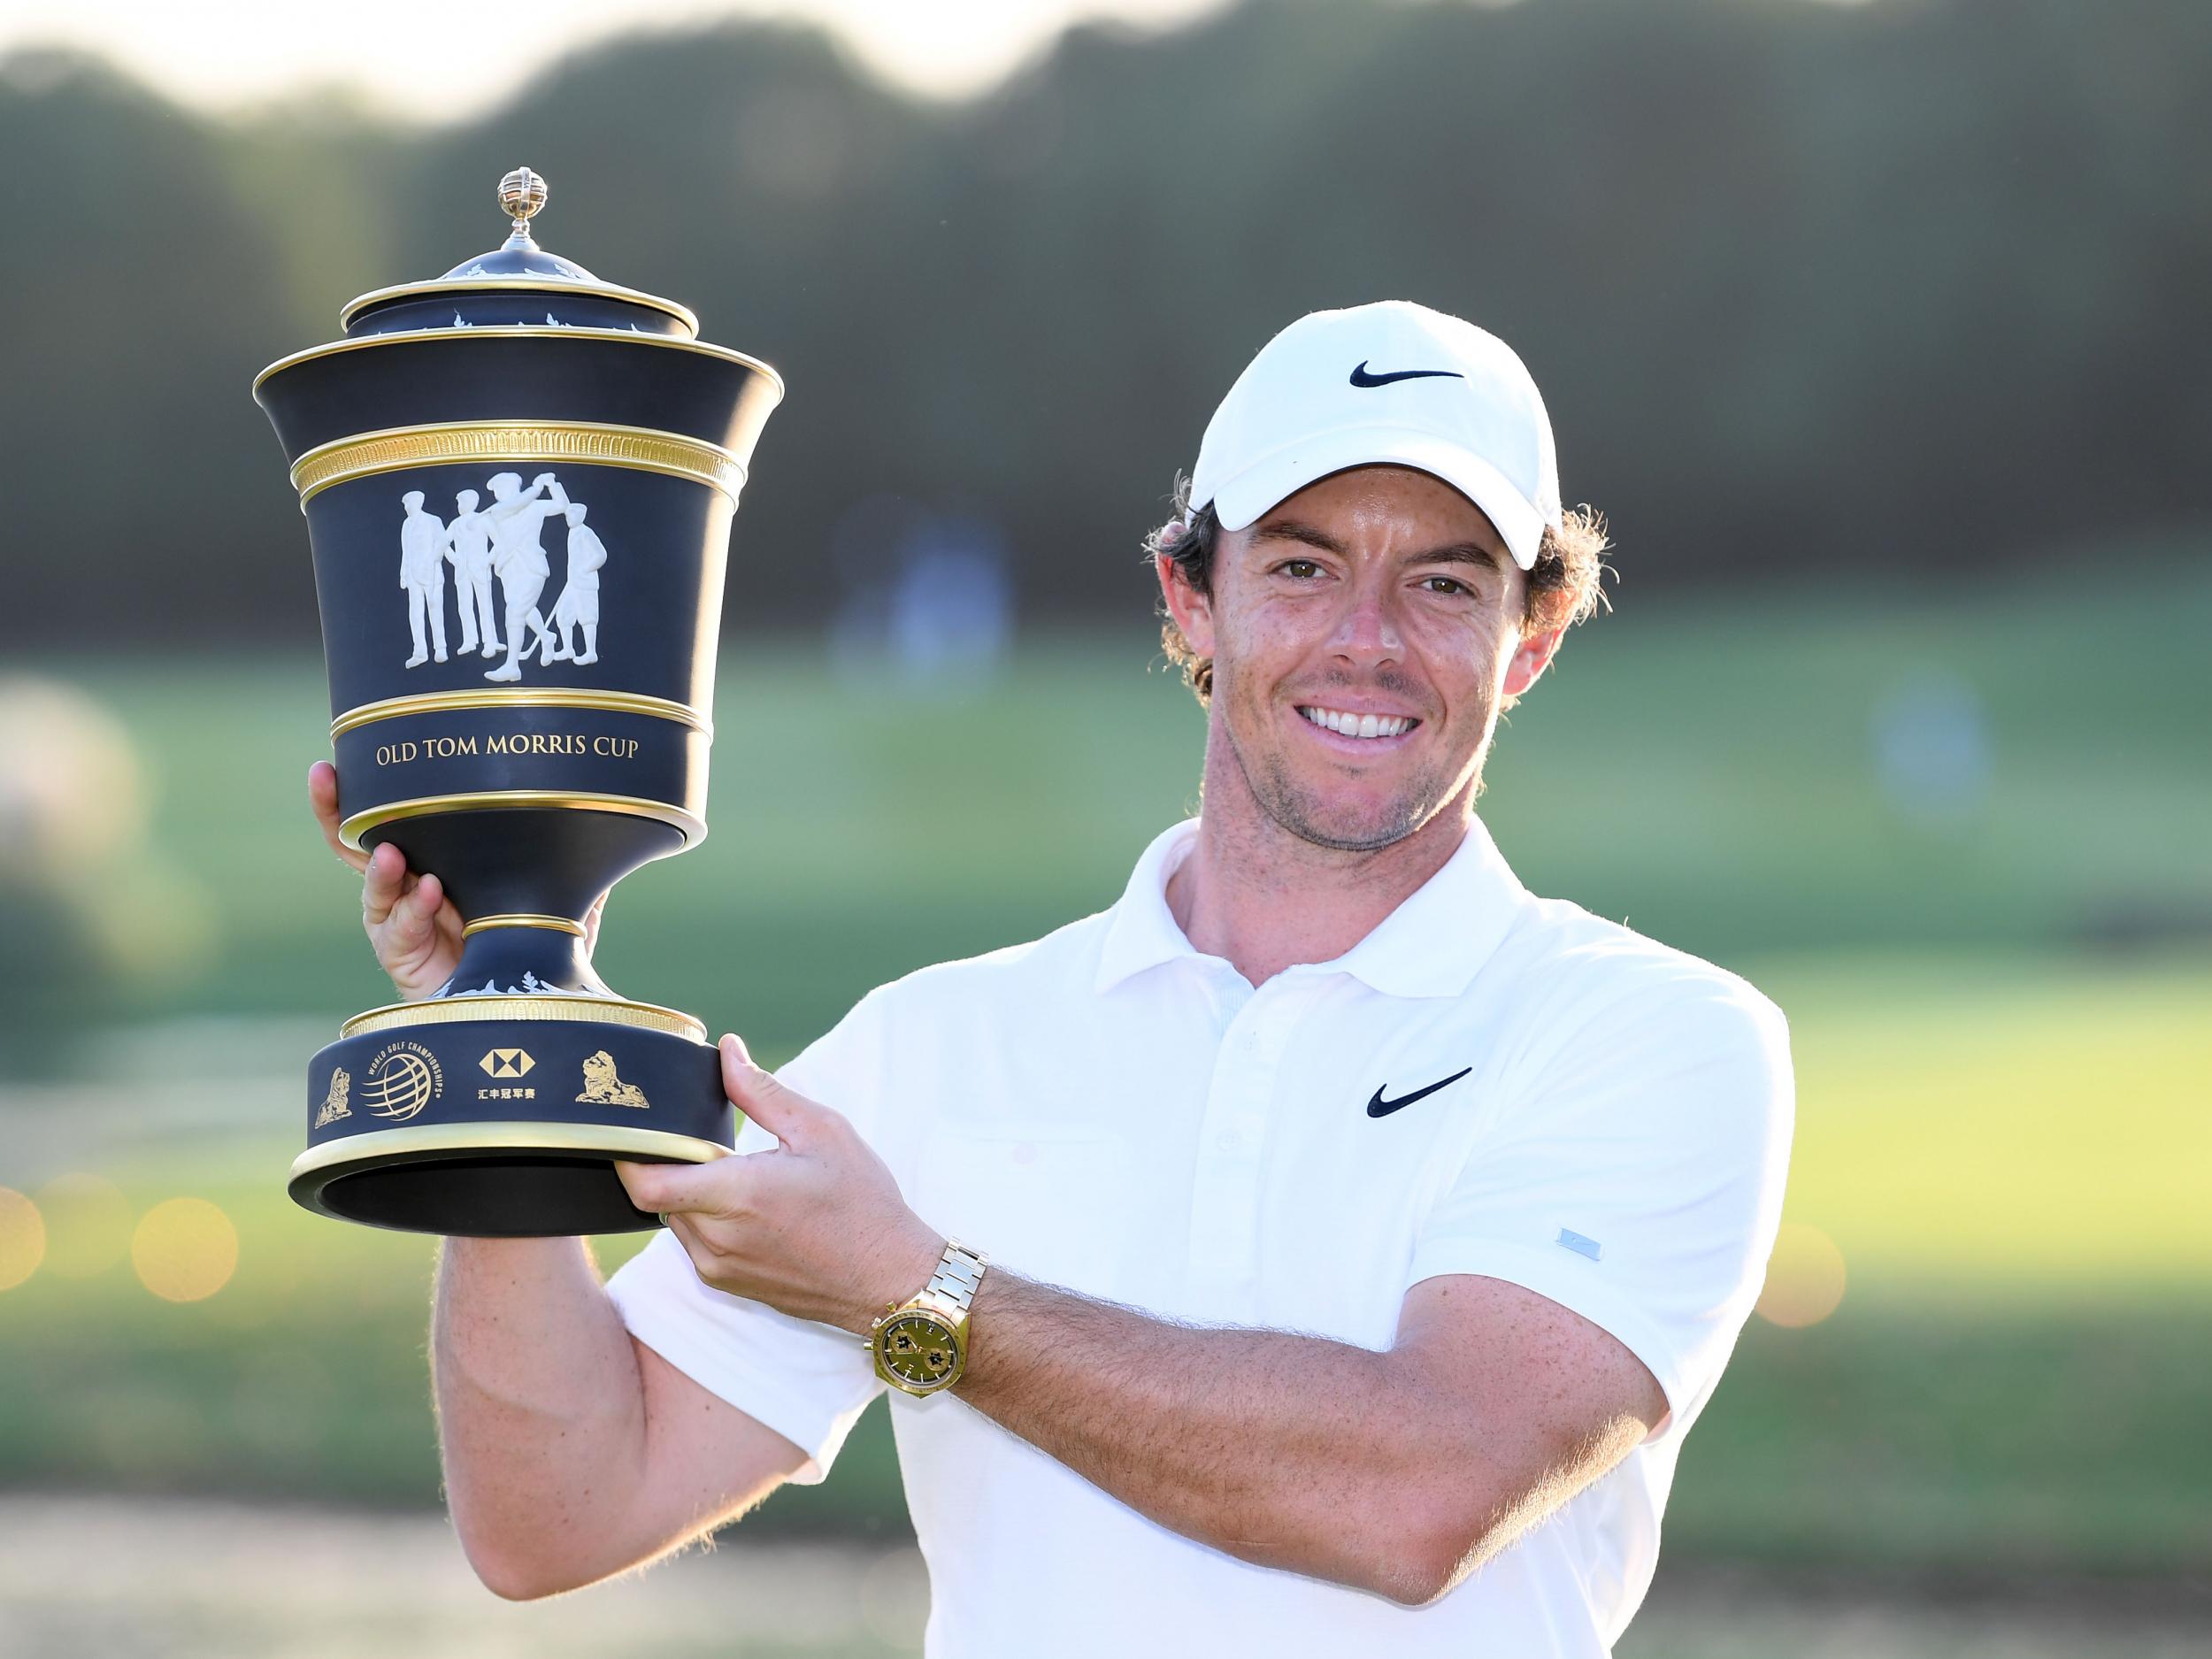 Rory McIlroy edged out defending champion Xander Schauffele in a play-off